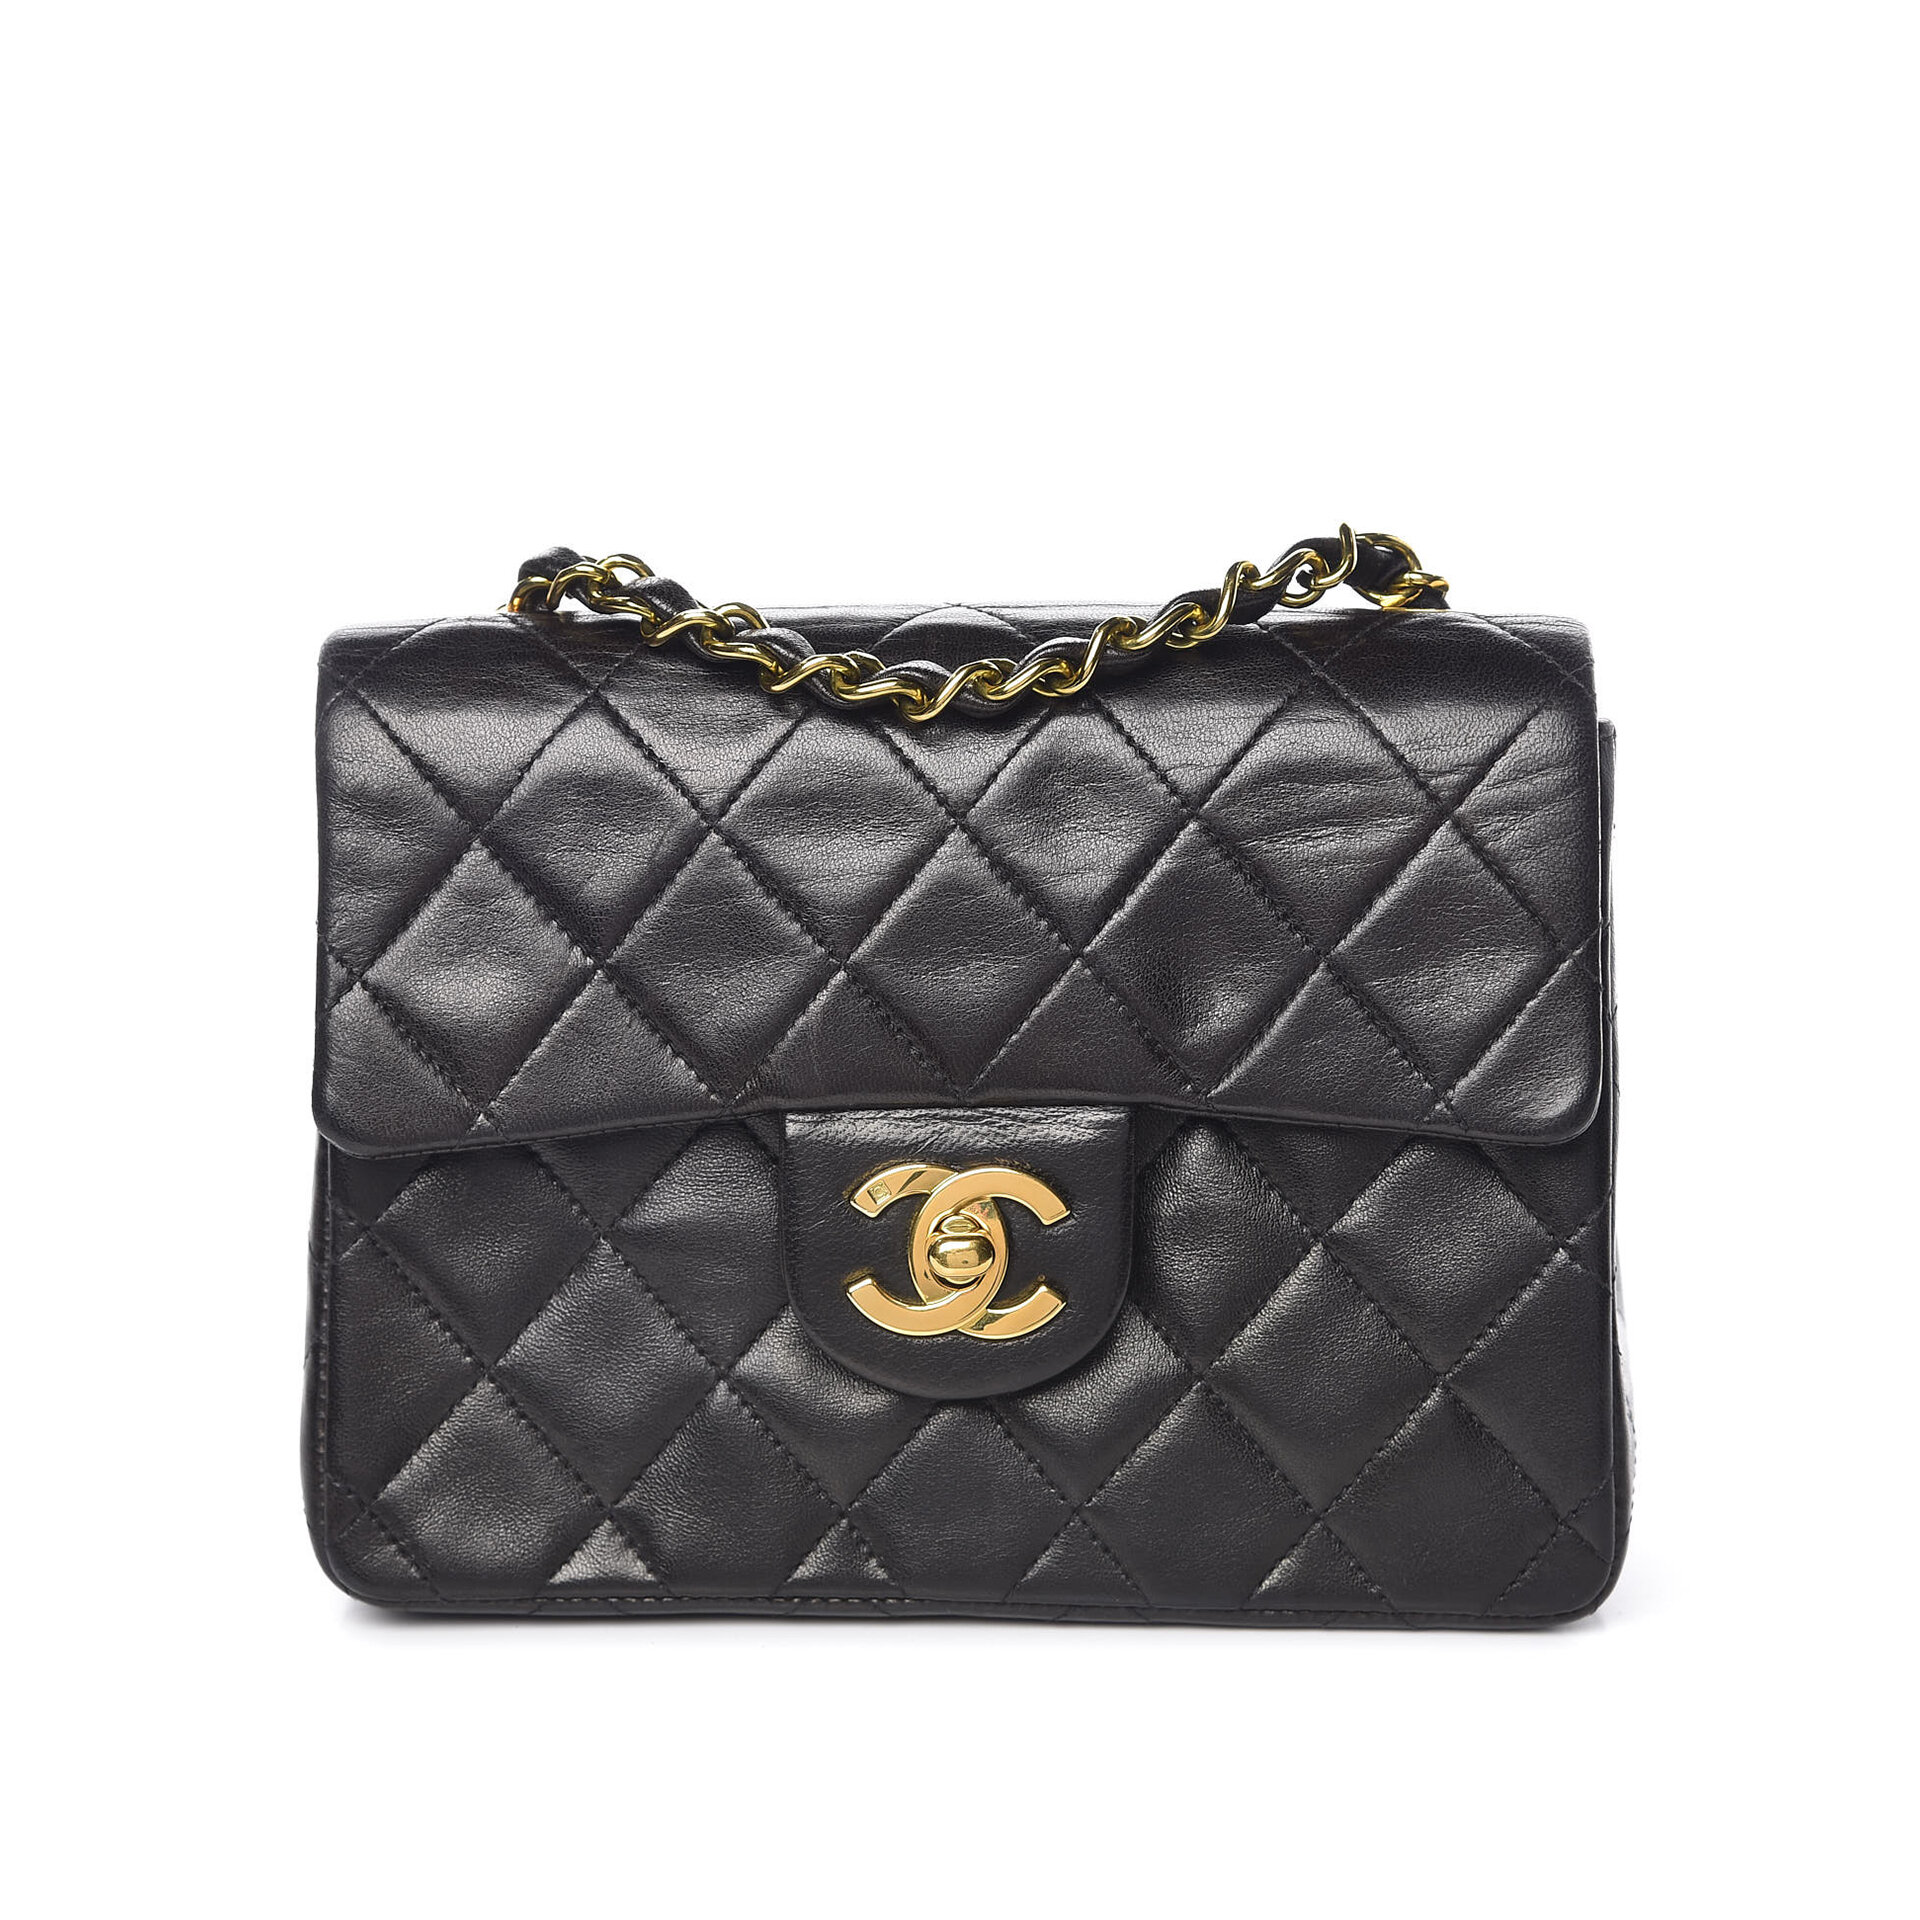 CHANEL Lambskin Quilted Mini Square Flap Black